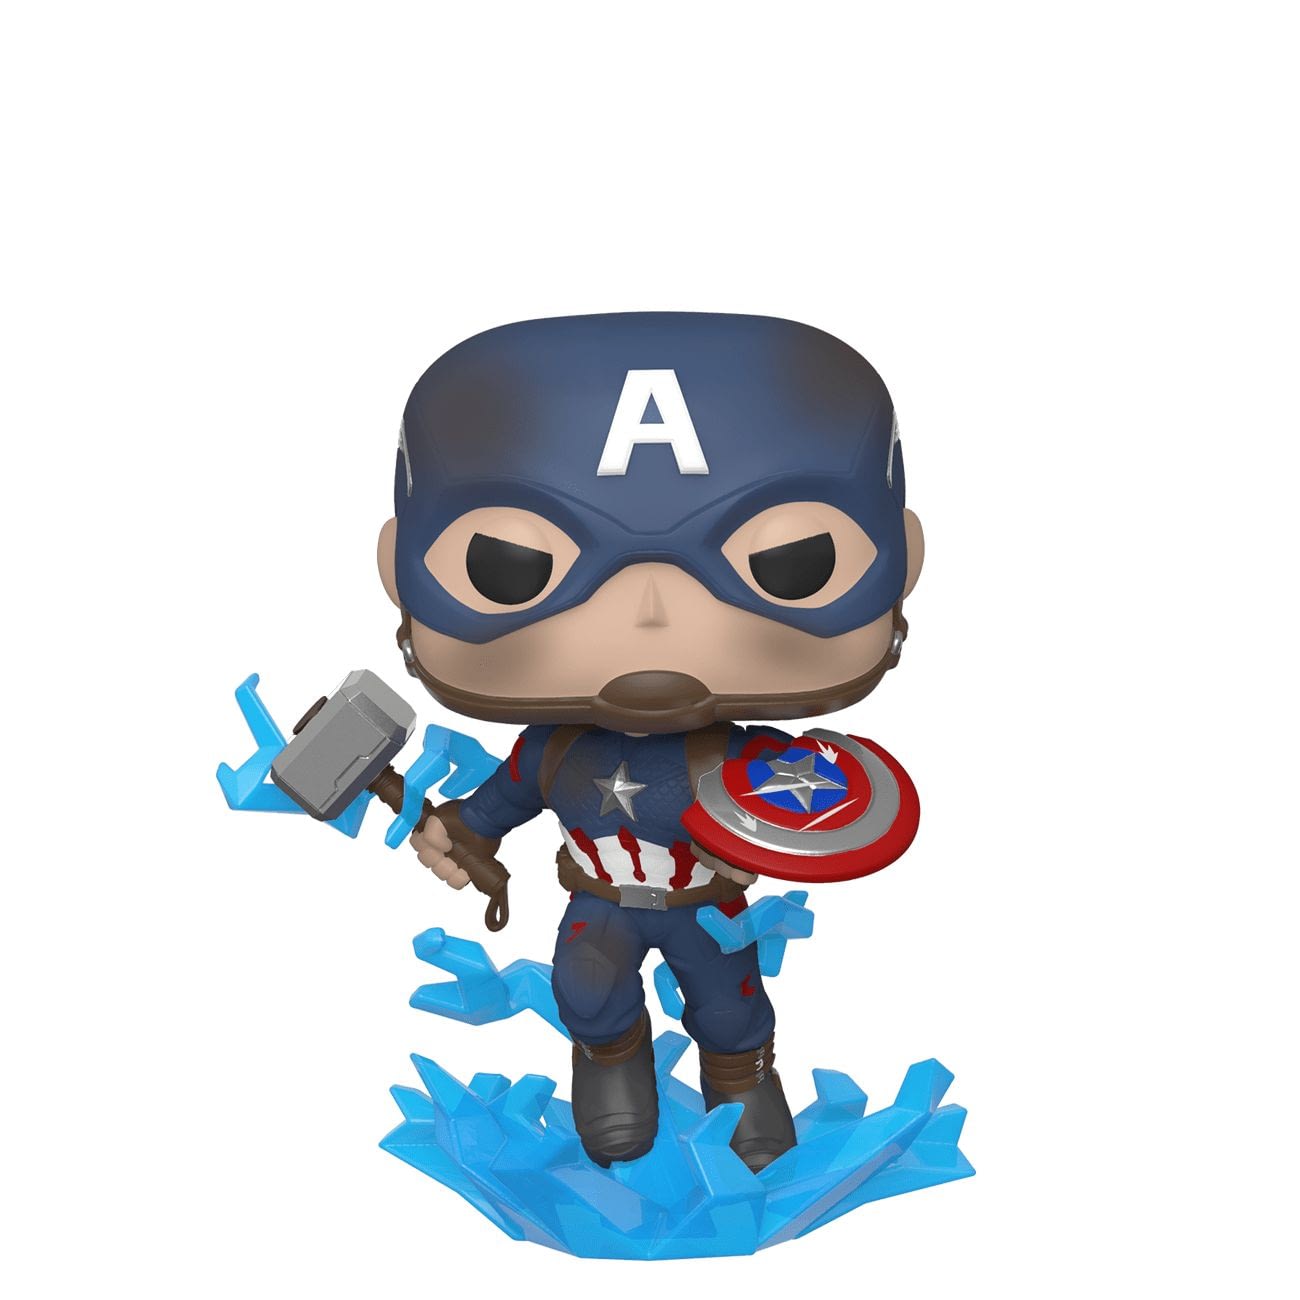 New Wave of “Avengers: Endgame” Funko Pop Figures Incoming 